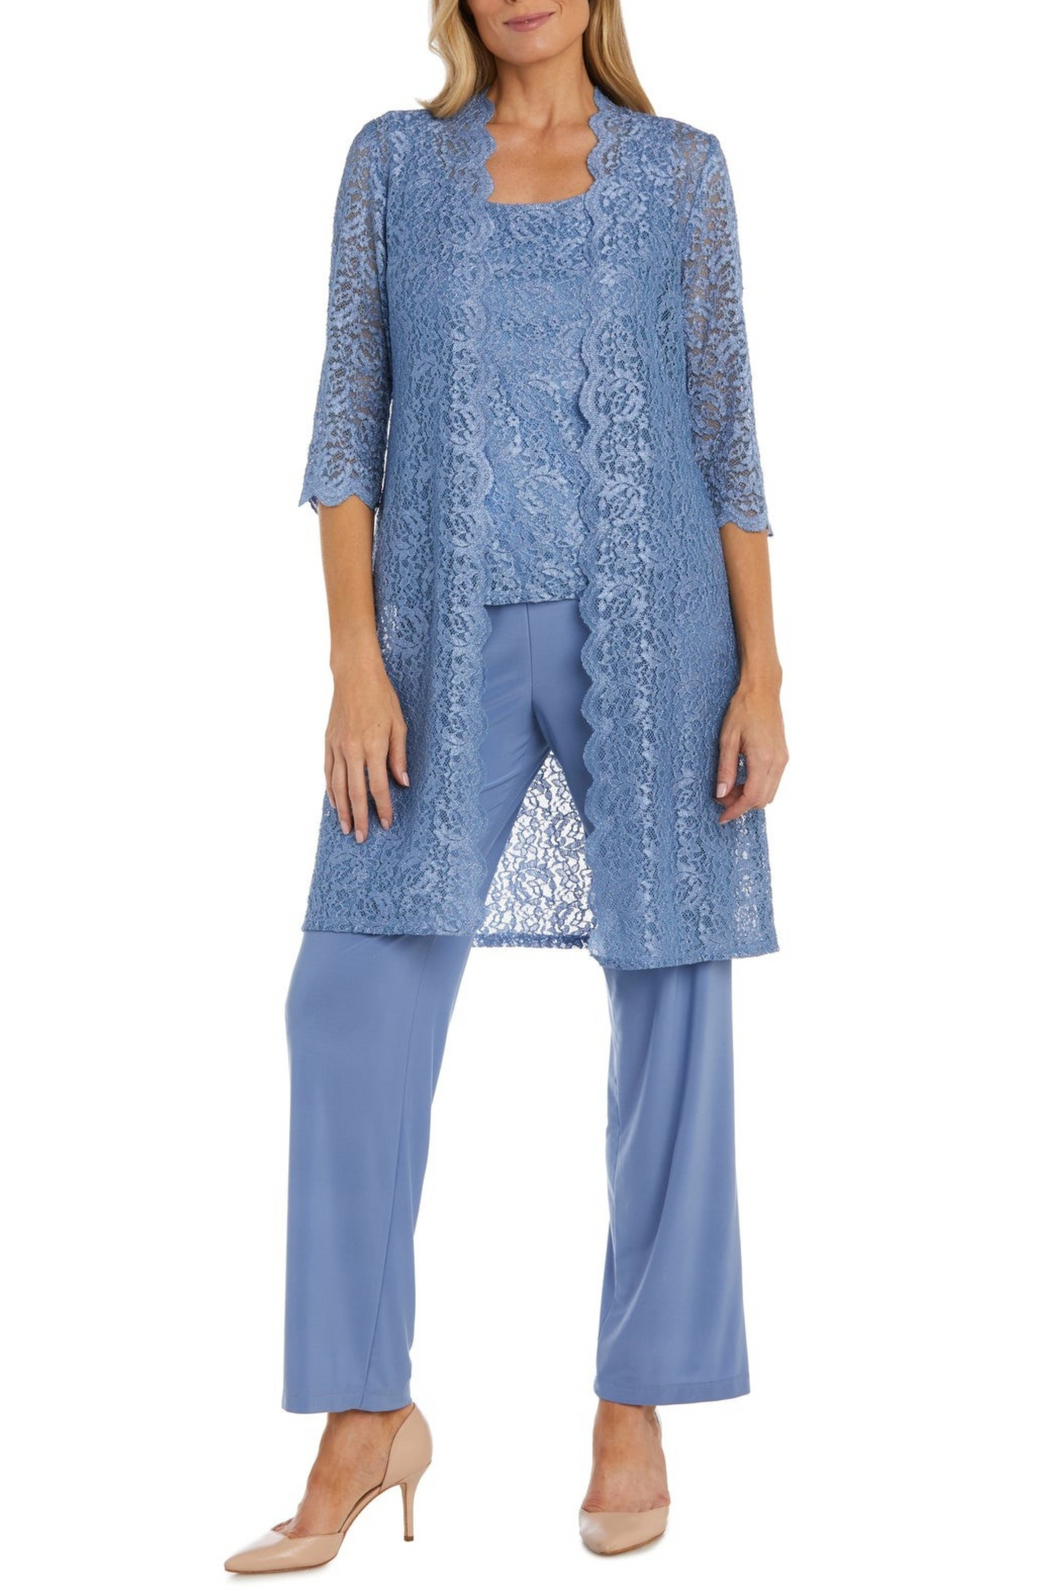 RM Richards Dusty Blue 3PC Pants Set 6 & 8 Remaining  USA 🇺🇸  Party, Mother of the Bride, Cocktail, Office